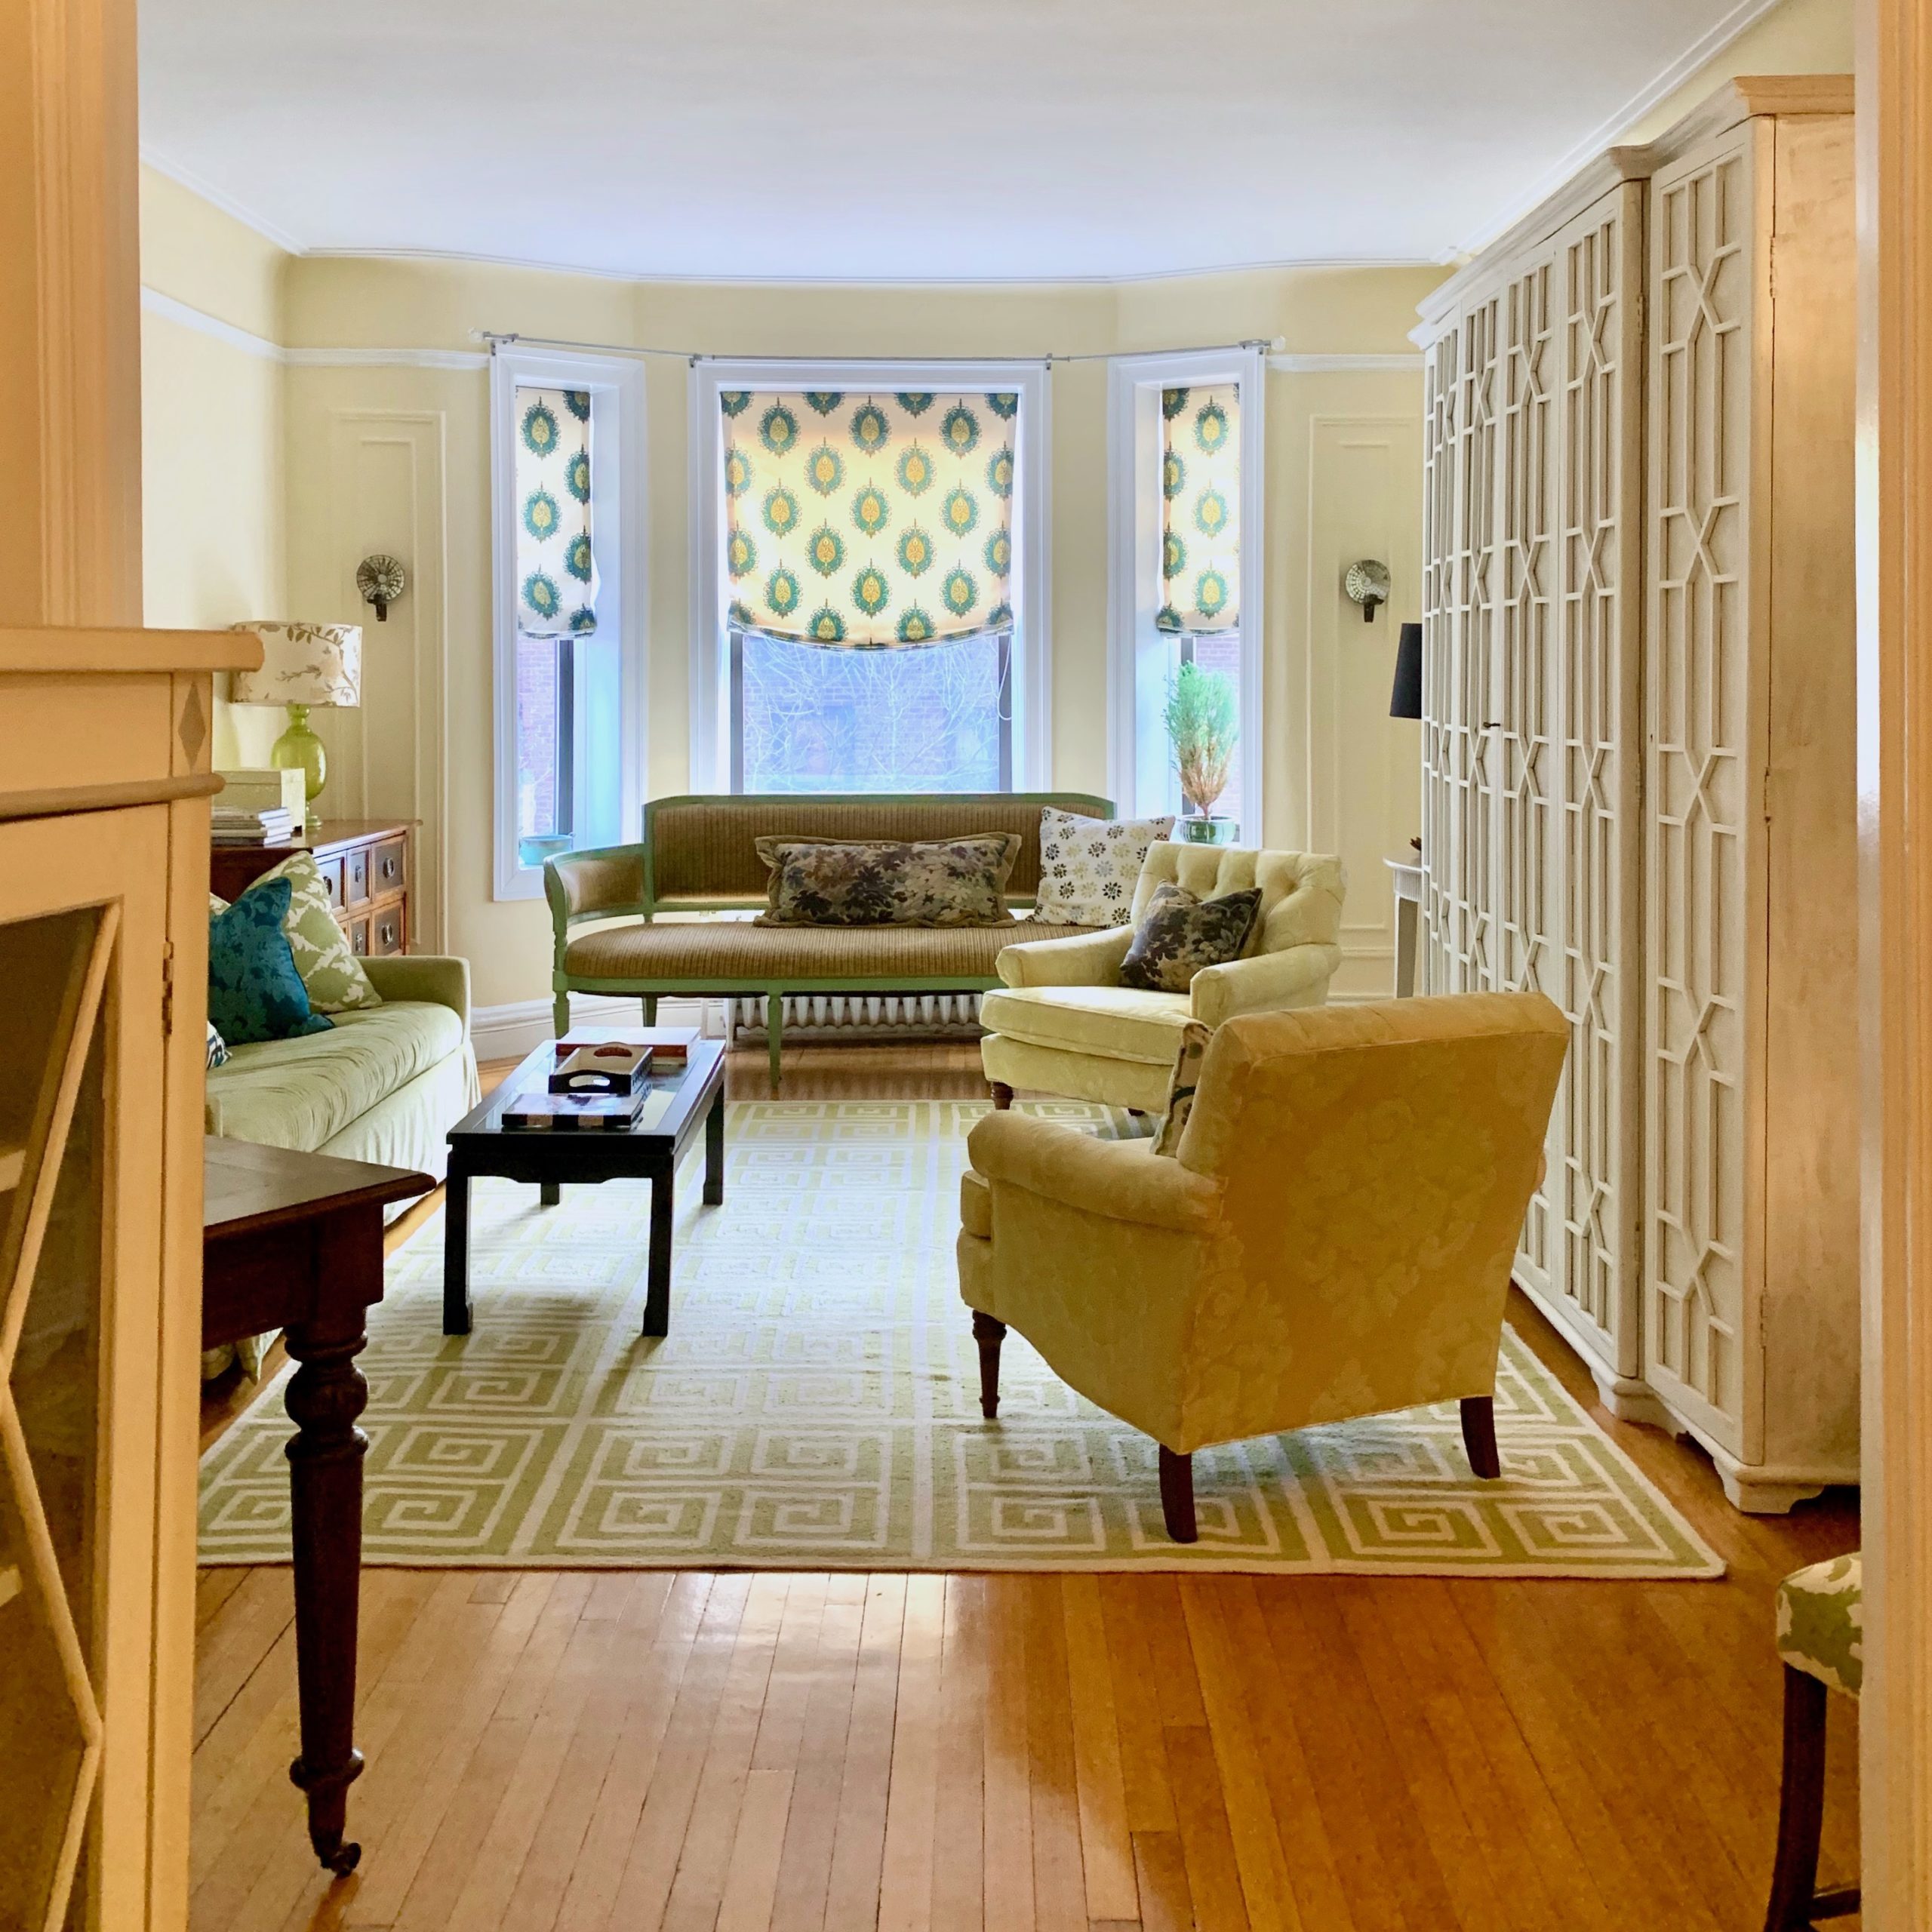 Pondfield Rd W - Bronxville apartment for sale - entry-living room - Benjamin Moore America